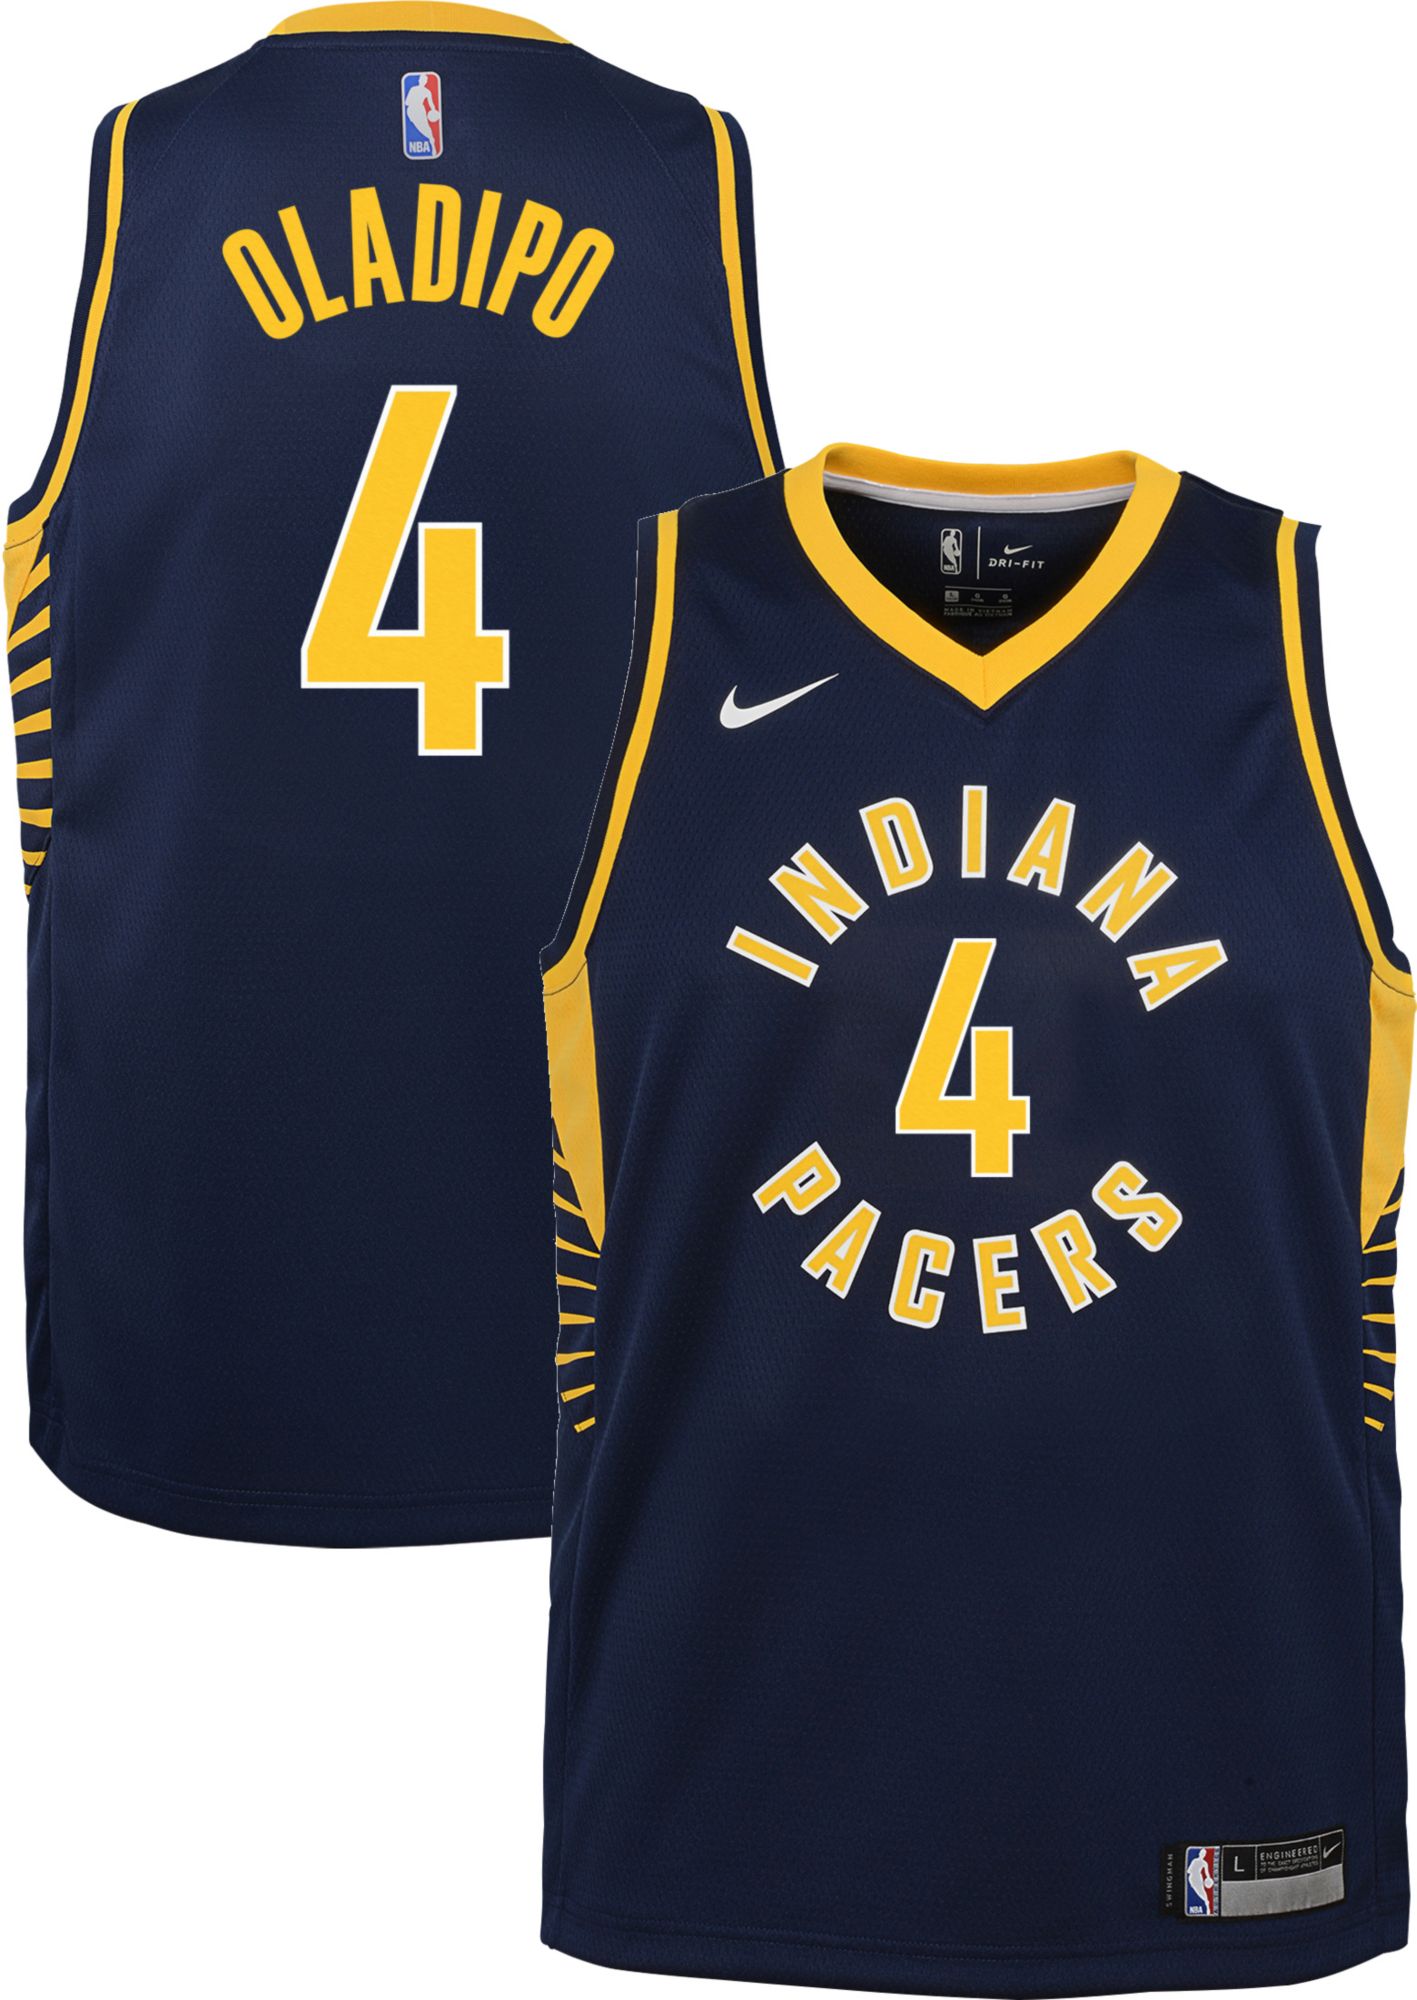 victor oladipo jersey